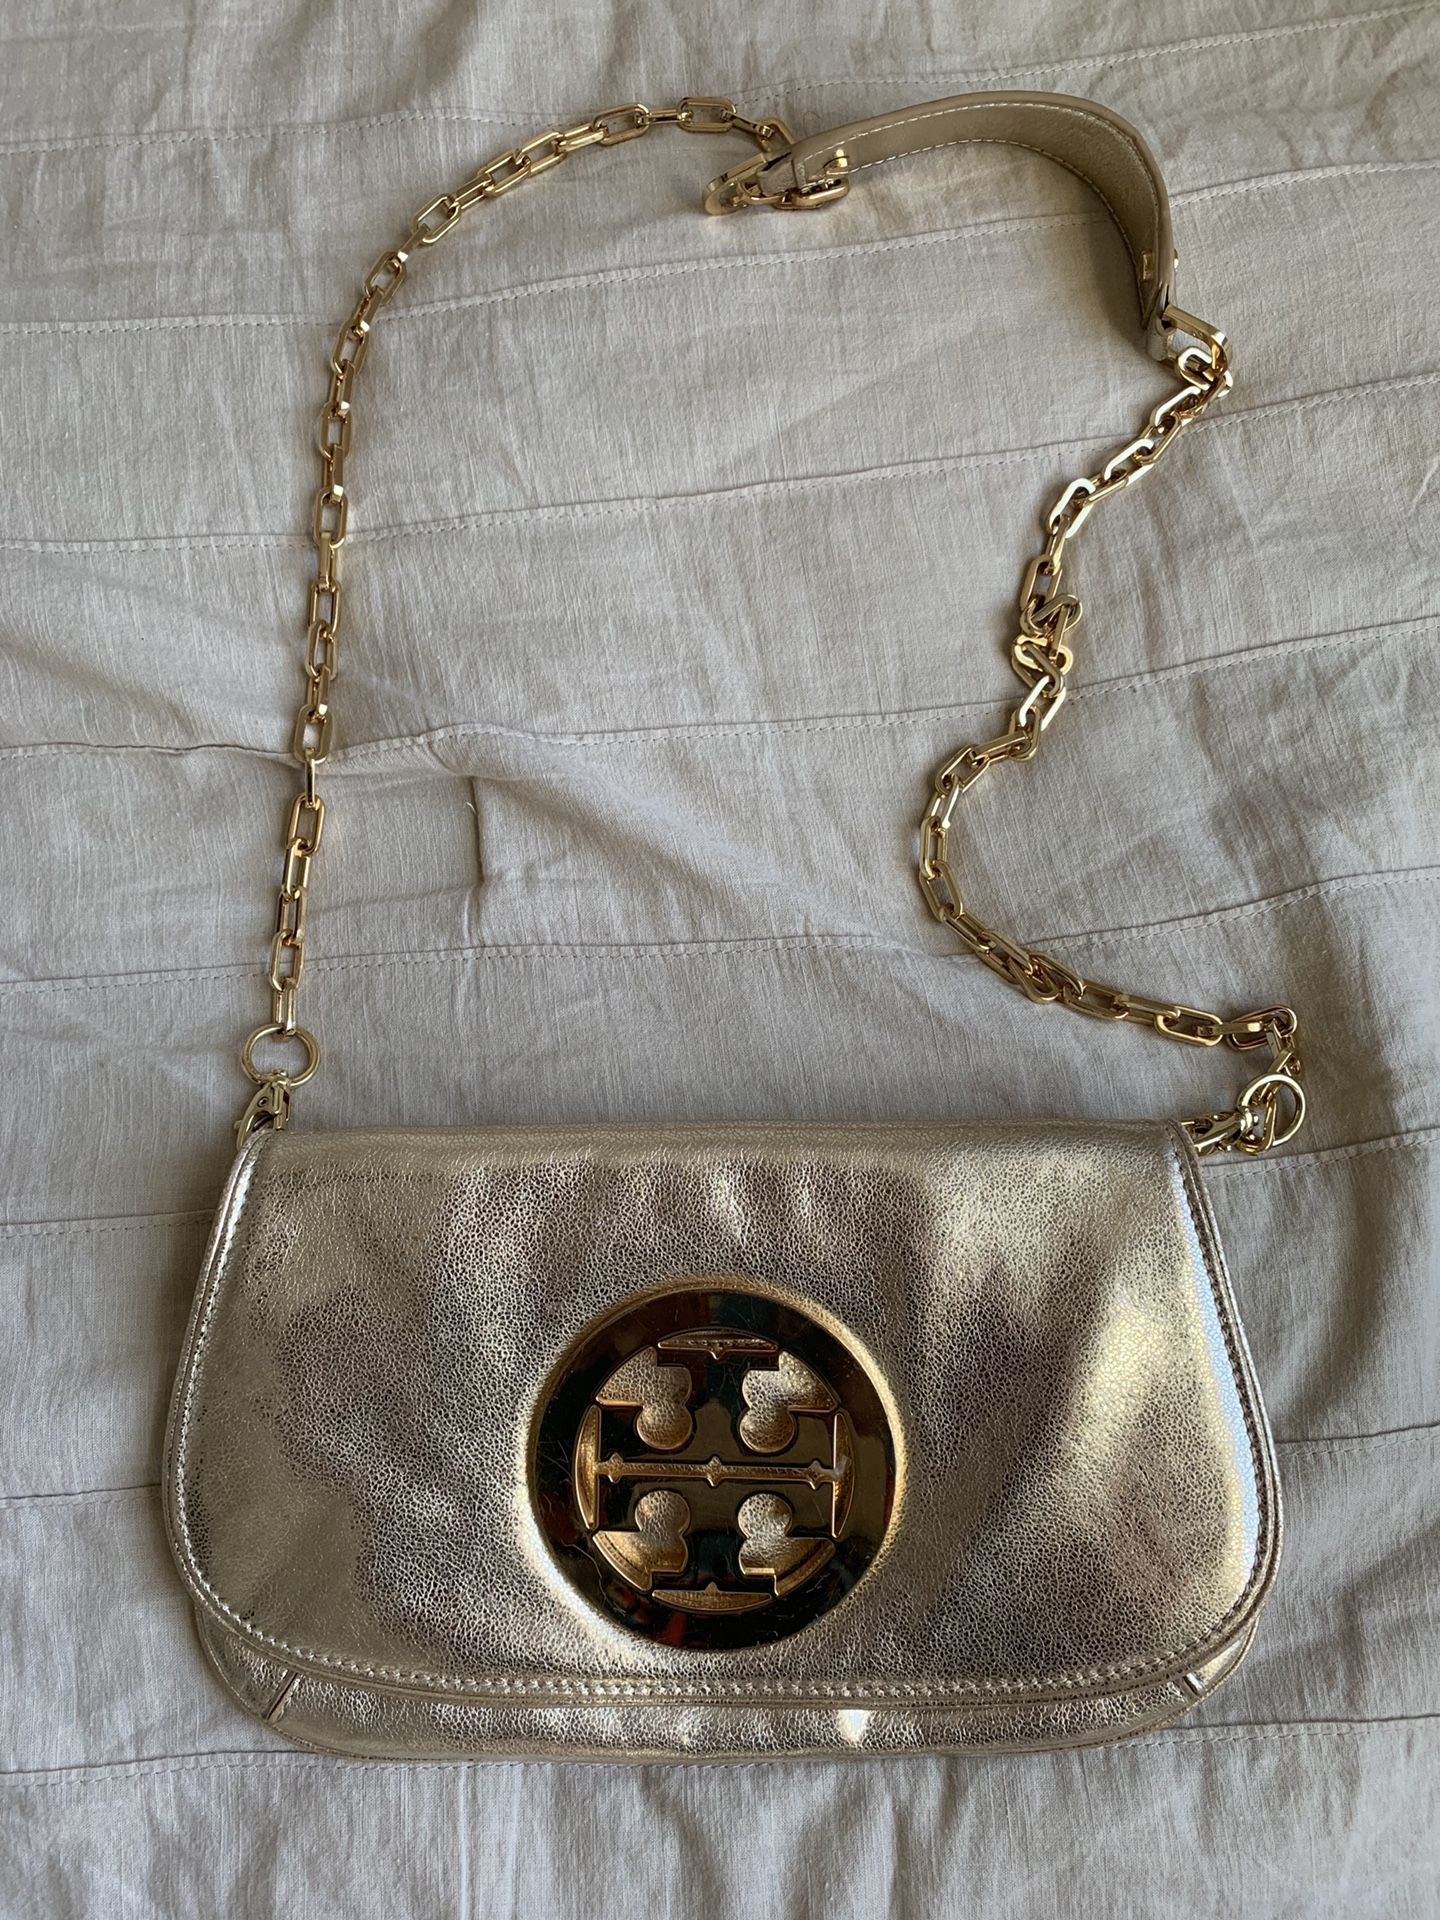 Limited edition Tory Burch Gold Reva Clutch PREOWNED/USED Tory Burch for  Sale in Katy, TX - OfferUp